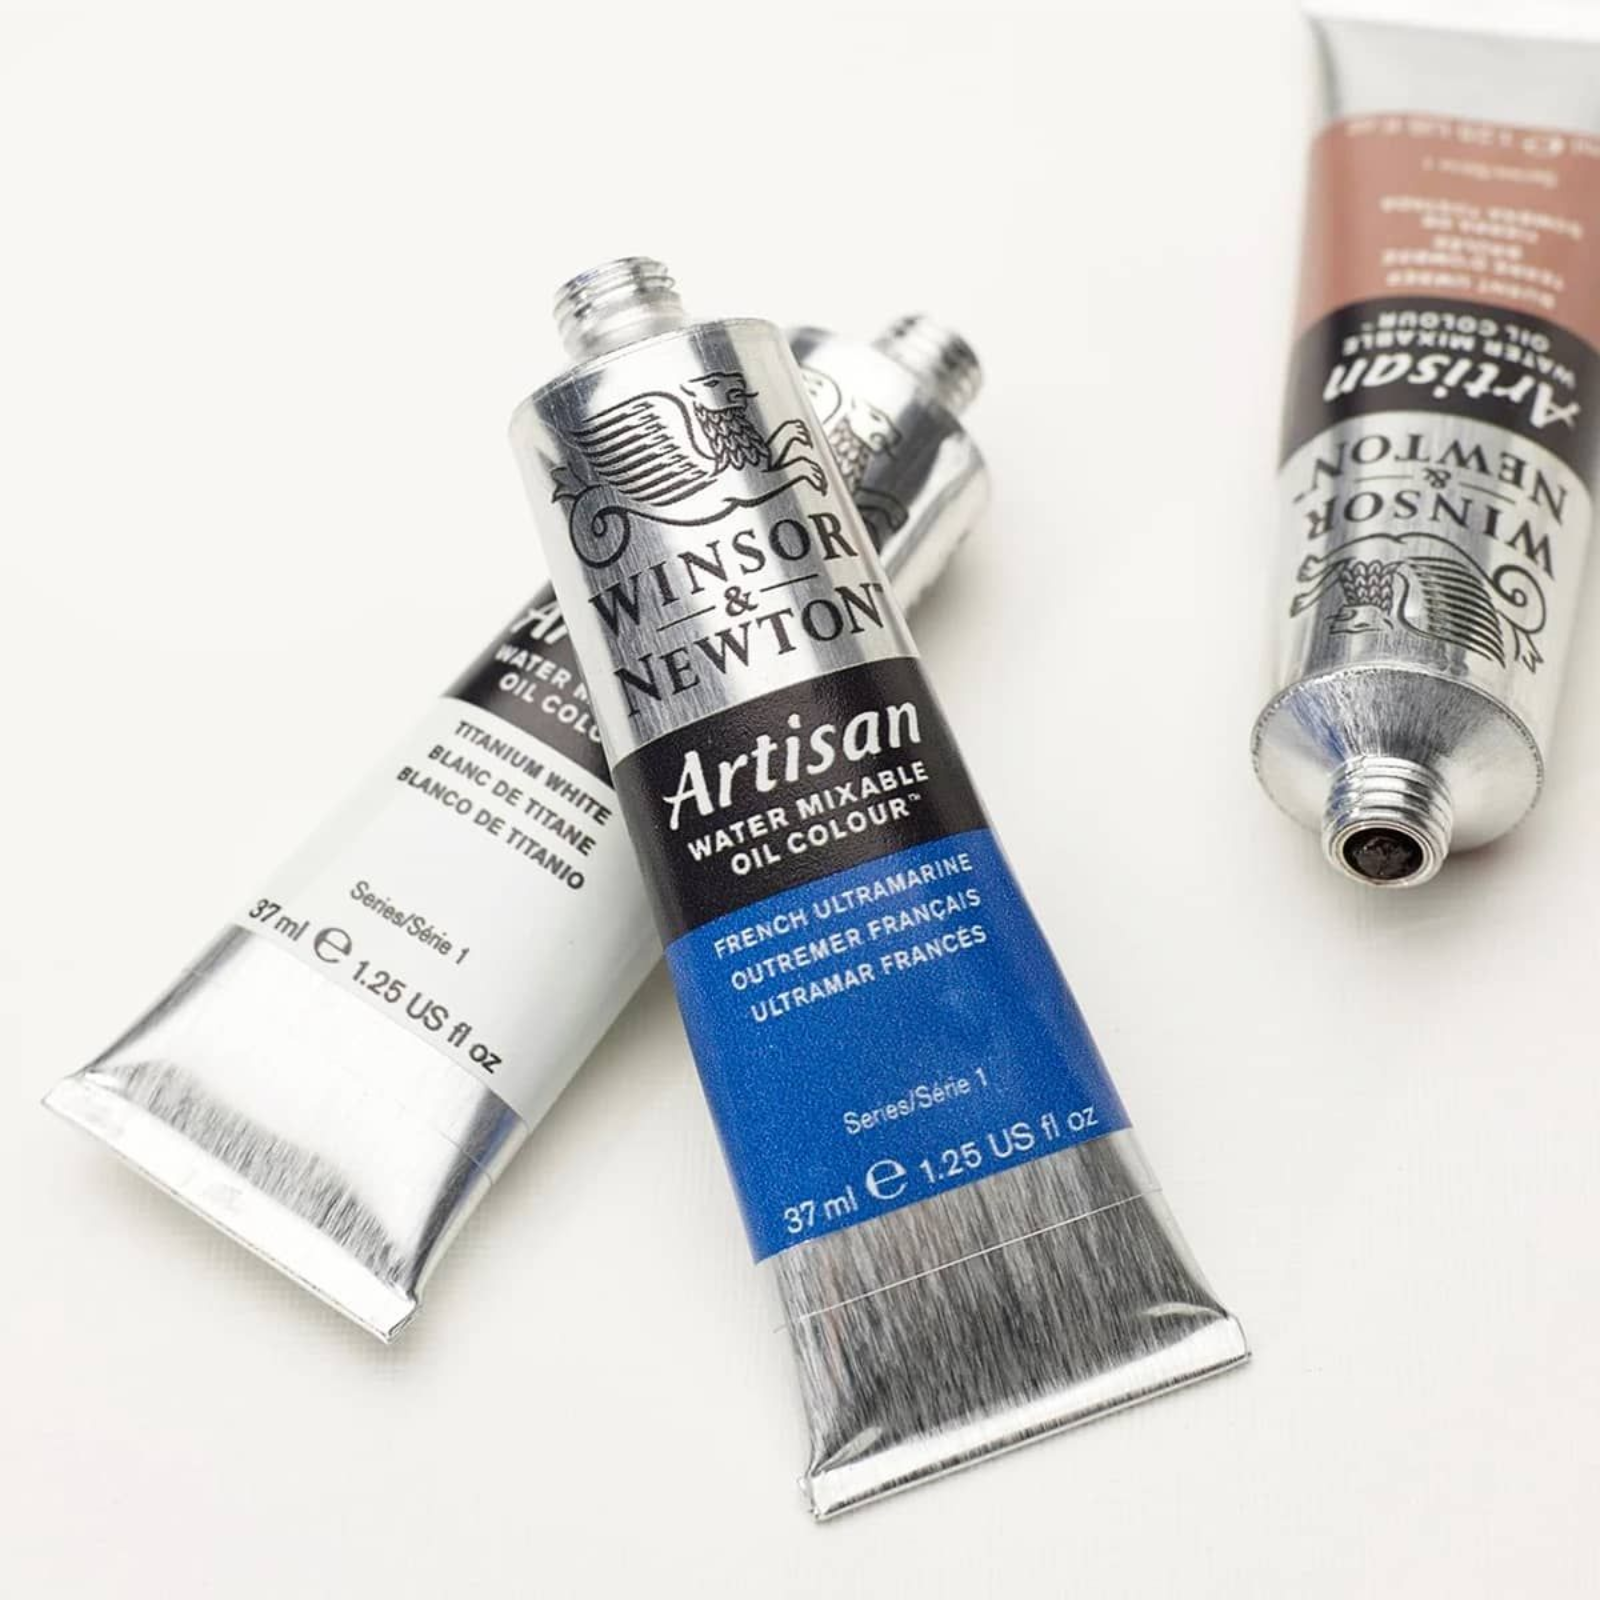 Winsor & Newton Artisan Water Mixable Oil Colour Set - These water mixable oils are easy to work with